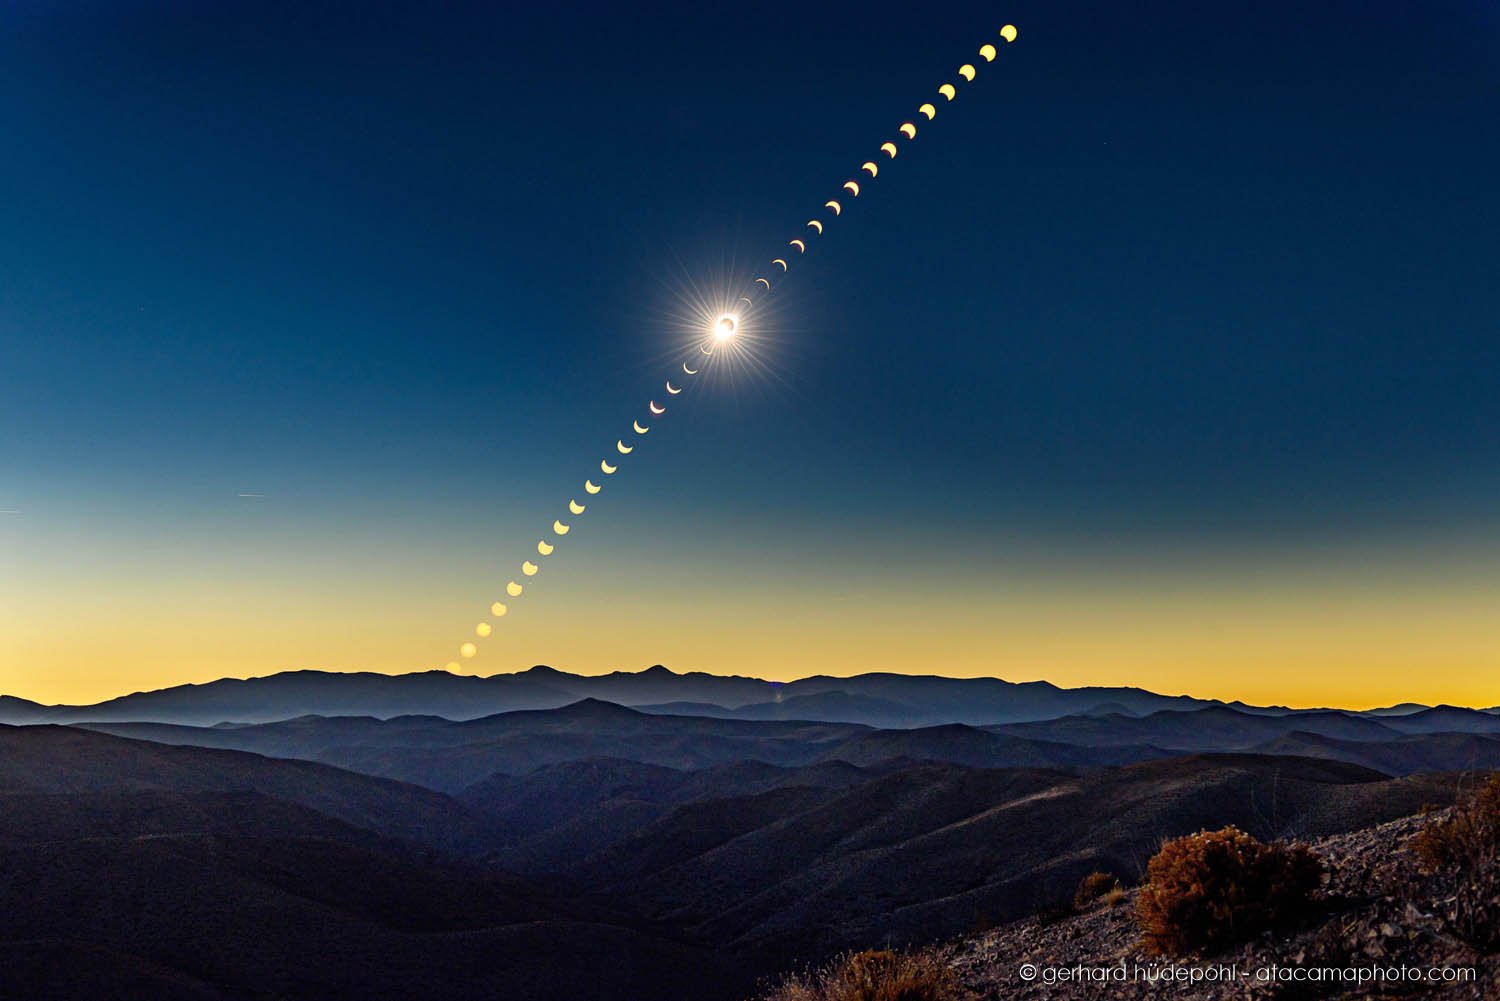 Sequence showing the total solar eclipse in the Atacama region in July 2019